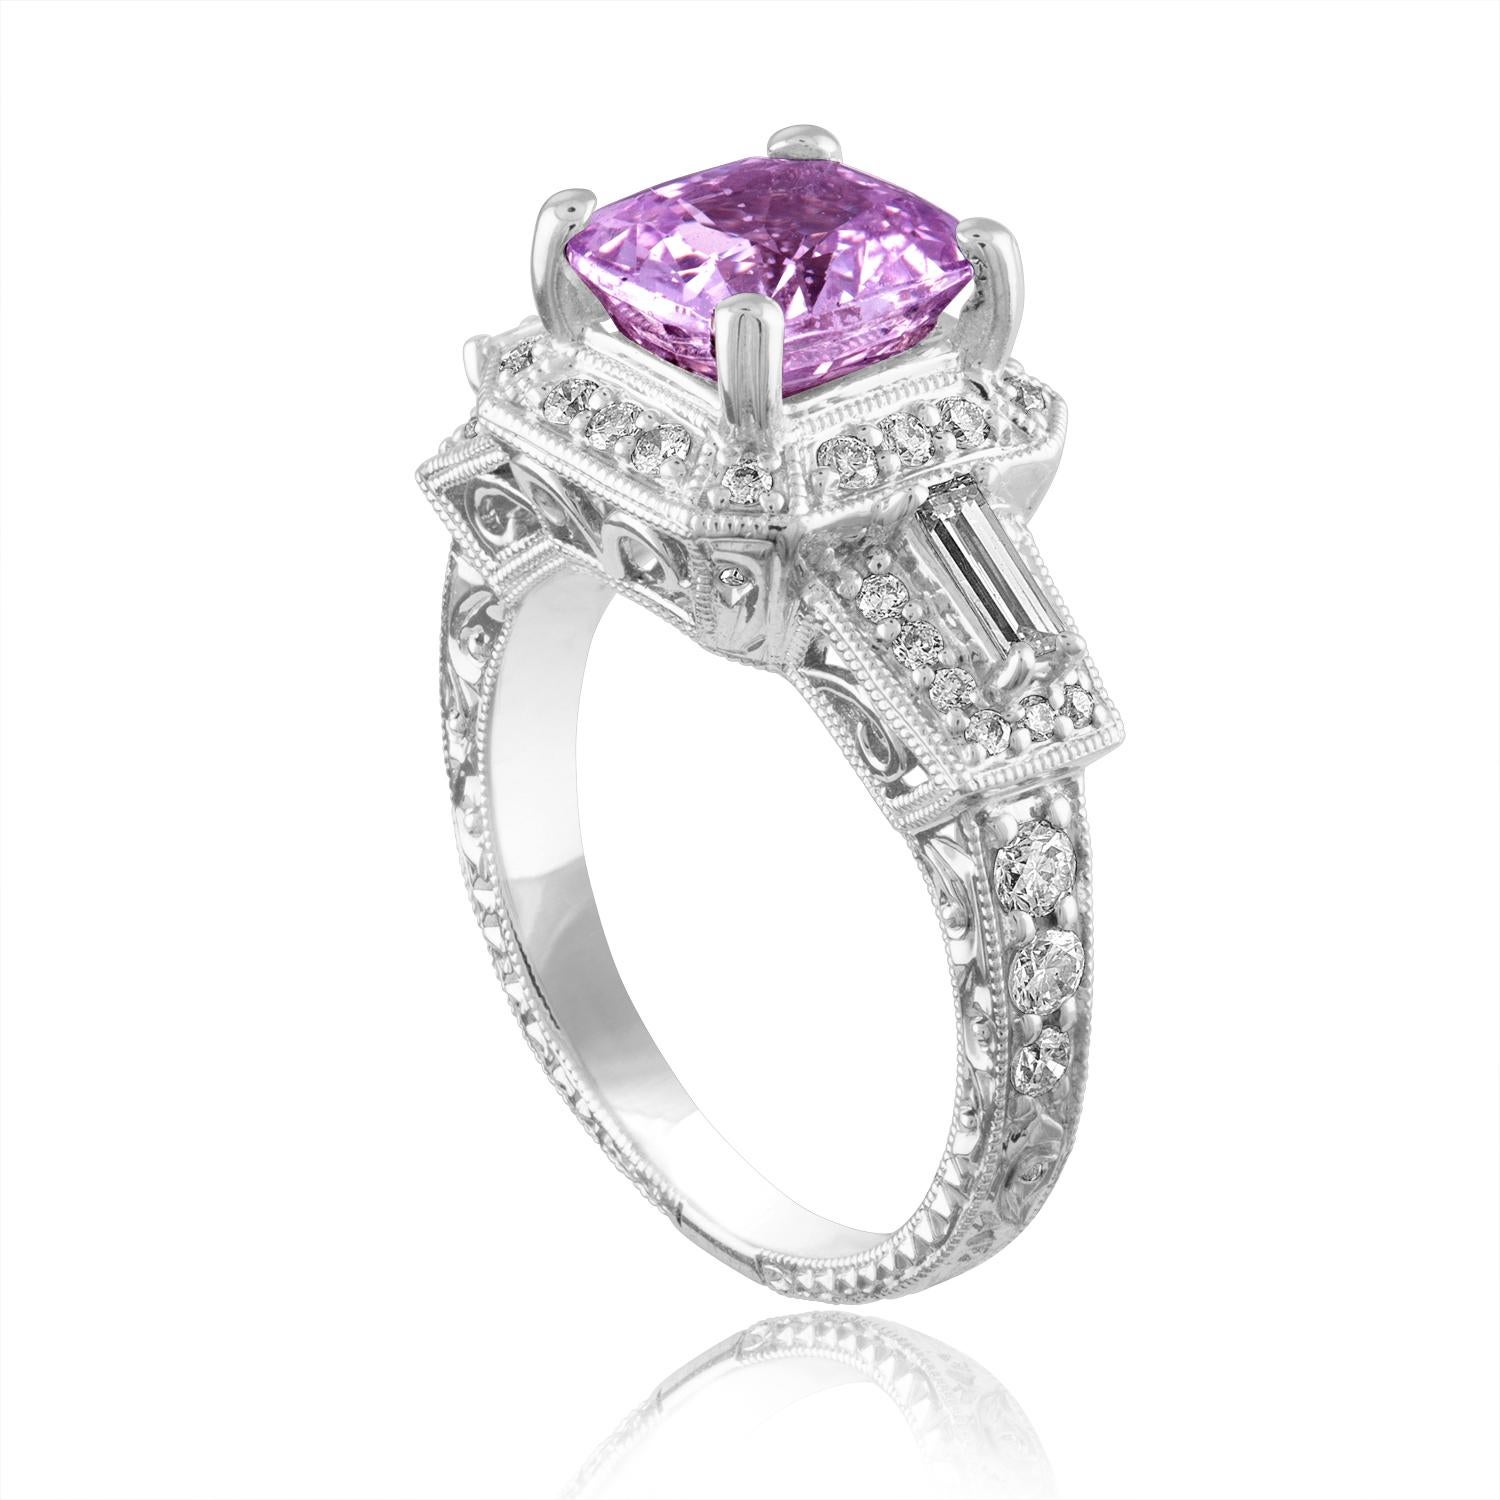 Beautiful Light Grayish Purple Cushion Sapphire.
The sapphire is set in Art Deco Revival Style of Milgrain and Filigree
The ring is 14K White Gold.
The Sapphire is a cushion 2.63 Carat Light Grayish Purple Sapphire.
The Sapphire is NO HEAT and is